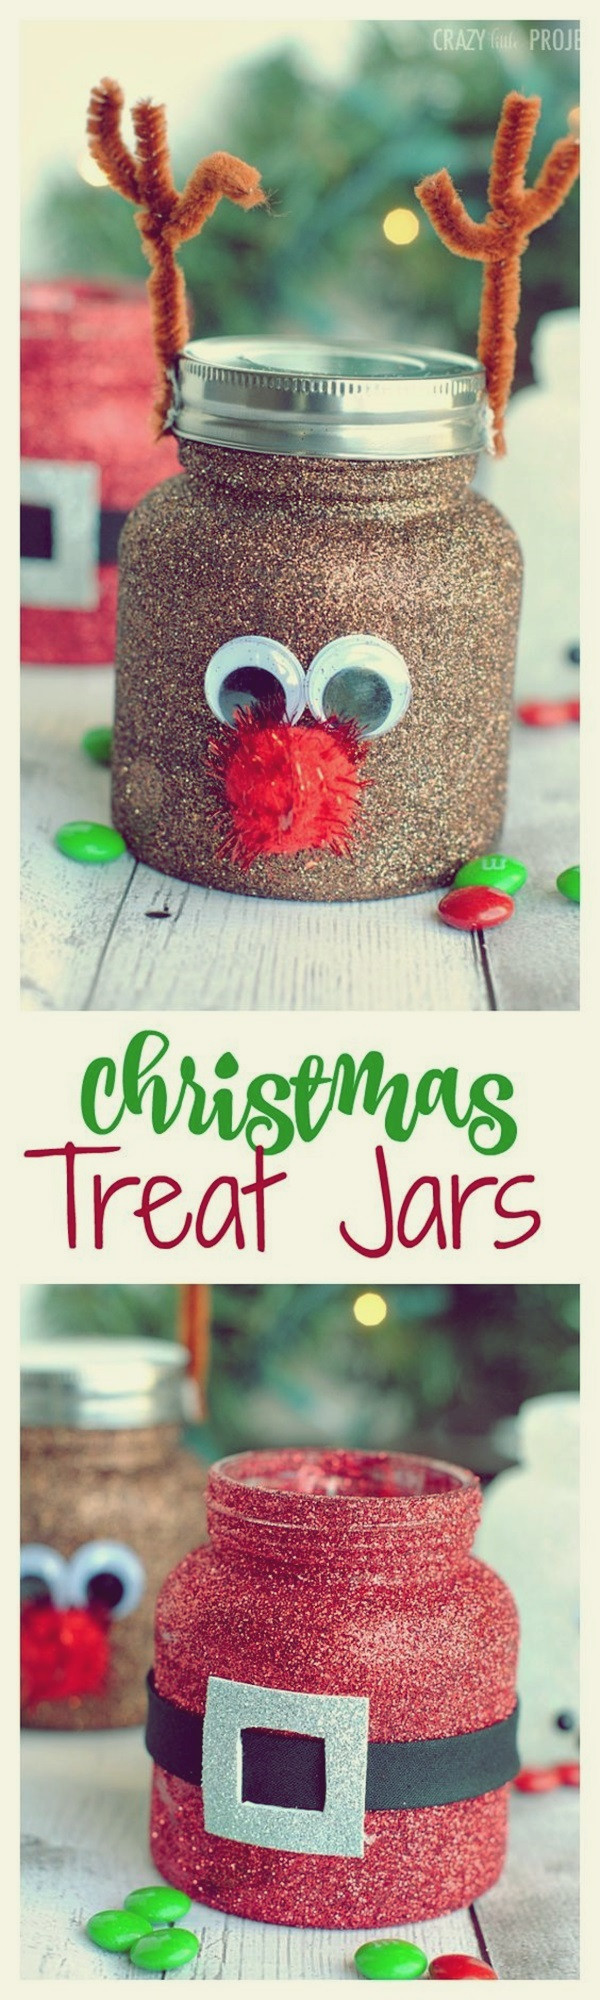 Christmas Gifts For Crafters
 135 Homemade Christmas Gift Ideas to make him say "WOW"